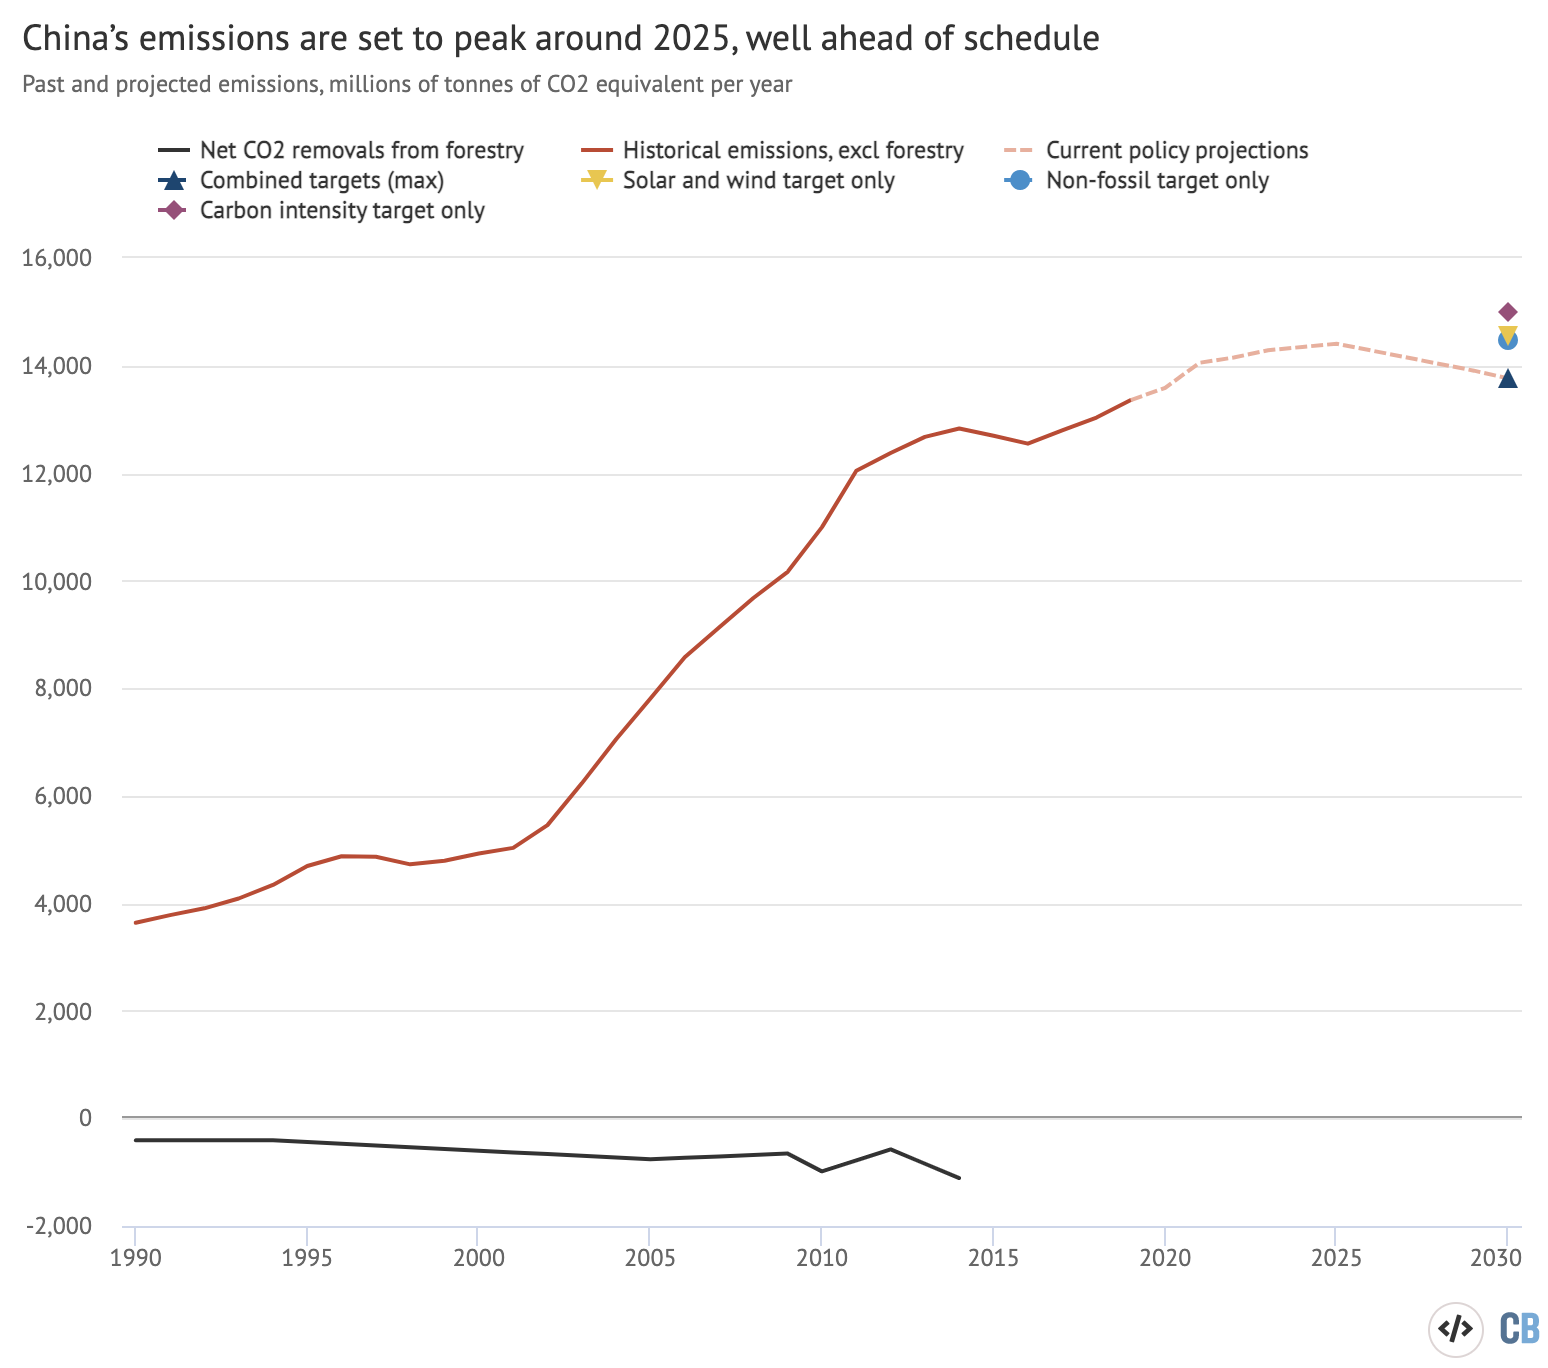 Past and projected greenhouse gas emissions in China under current policies, compared with estimated emission levels implied by achievement of individual targets in its nationally-determined contribution under the Paris Agreement.